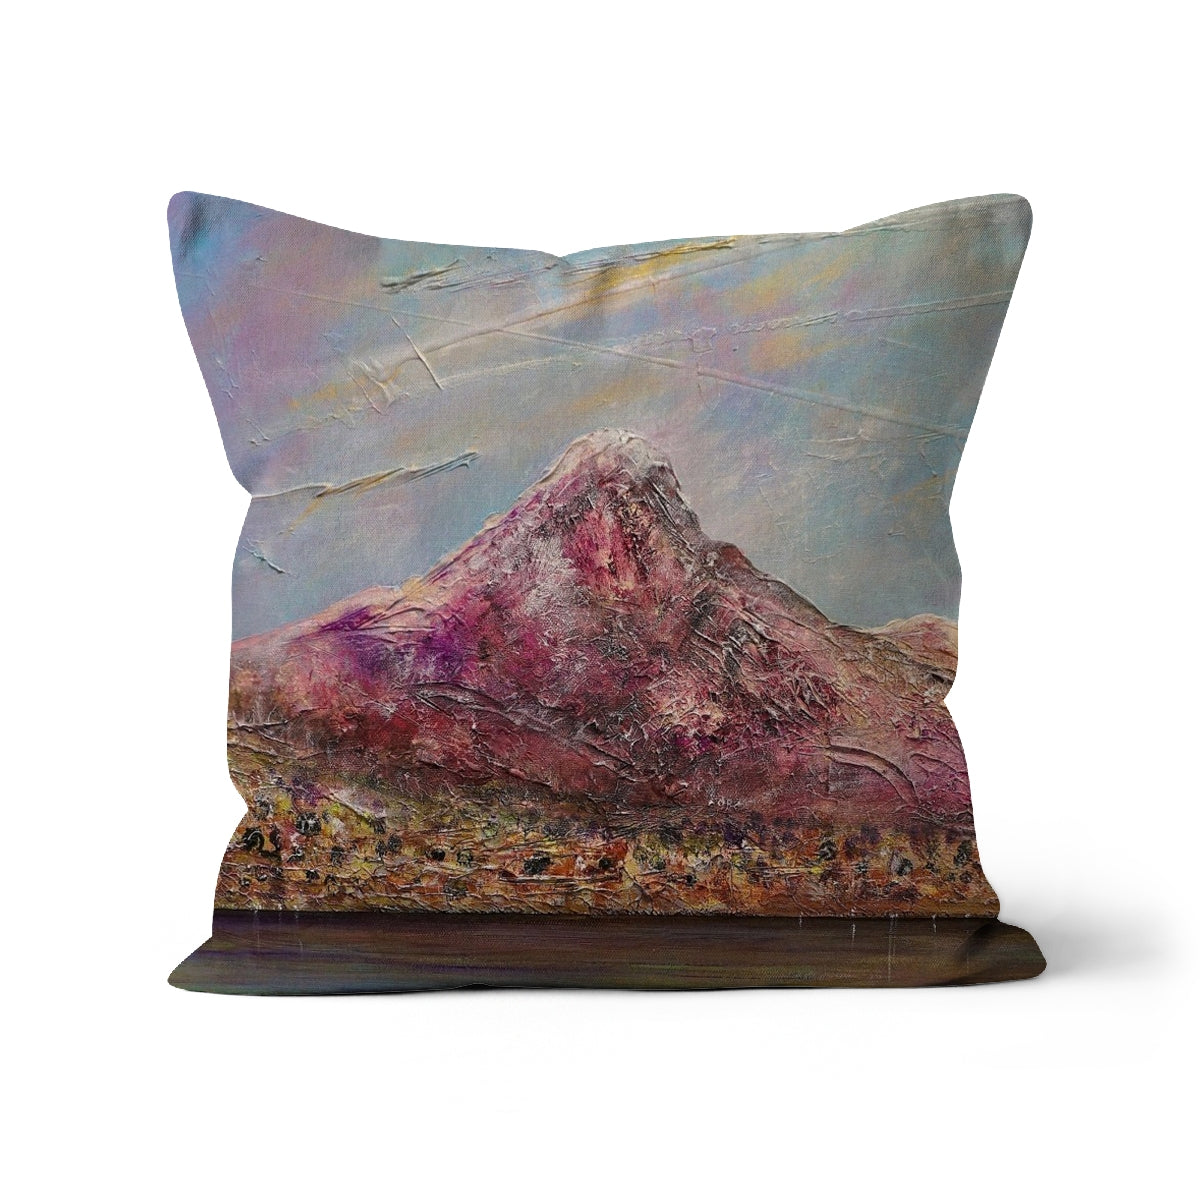 Ben Lomond Art Gifts Cushion-Cushions-Scottish Lochs & Mountains Art Gallery-Canvas-12"x12"-Paintings, Prints, Homeware, Art Gifts From Scotland By Scottish Artist Kevin Hunter